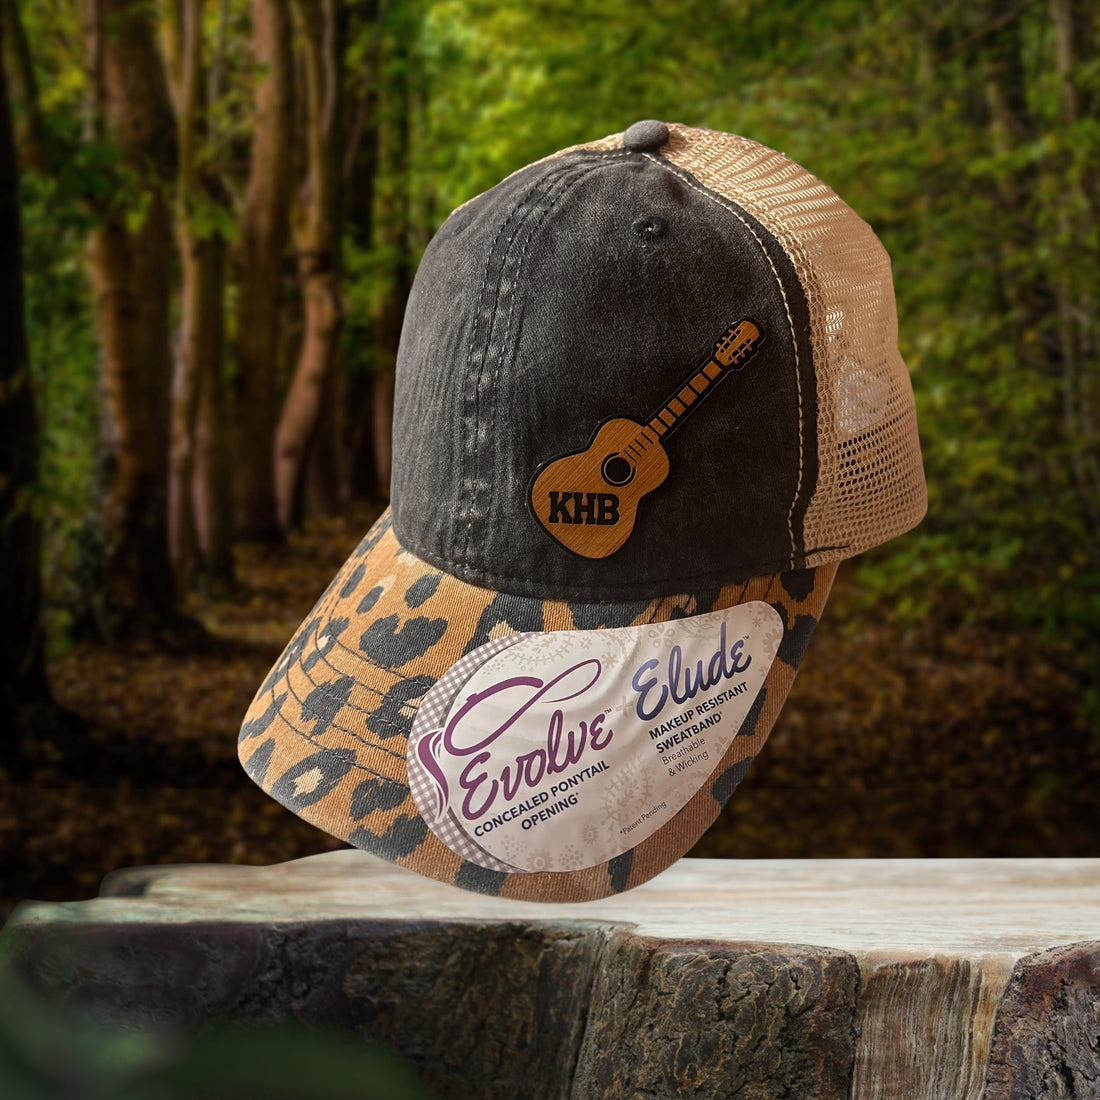  Image of the Kelly Hughes Band Wild Rhythm Cap, featuring the band's signature logo on the front, perfect for adding rock 'n' roll flair to your ensemble with style and comfort.